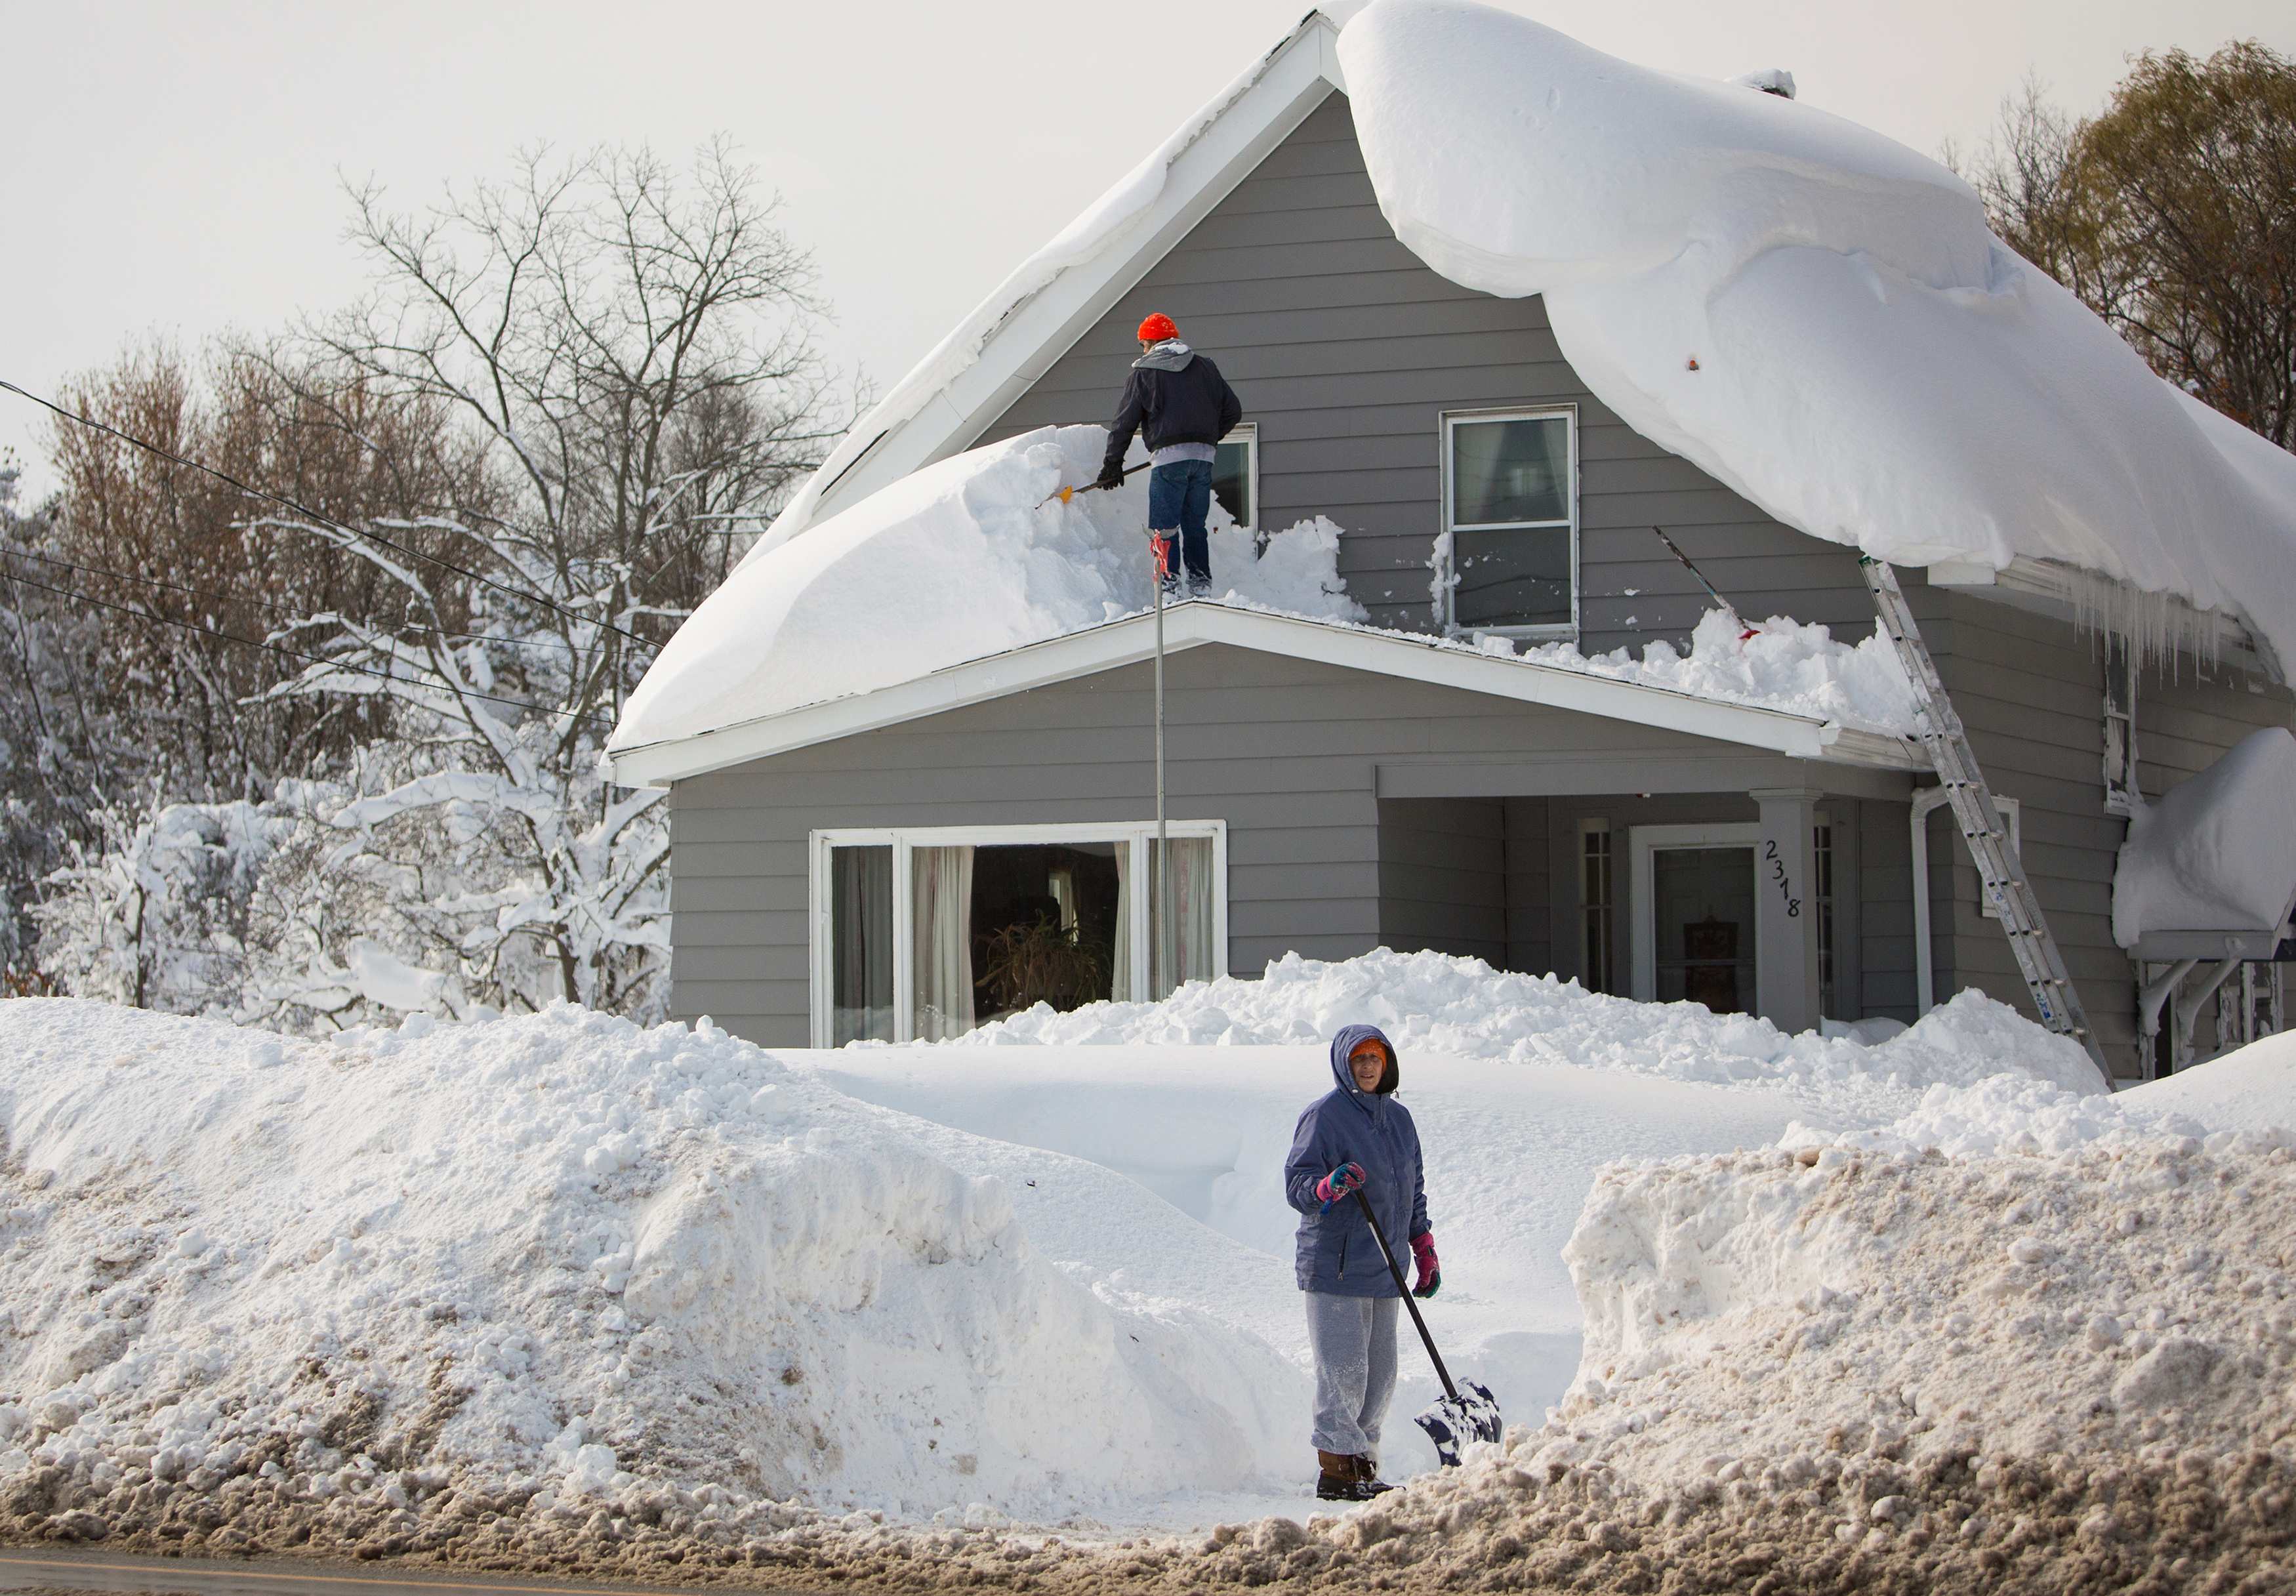 Deadly storm dumps nearly 6 feet of snow on upstate NY, with more